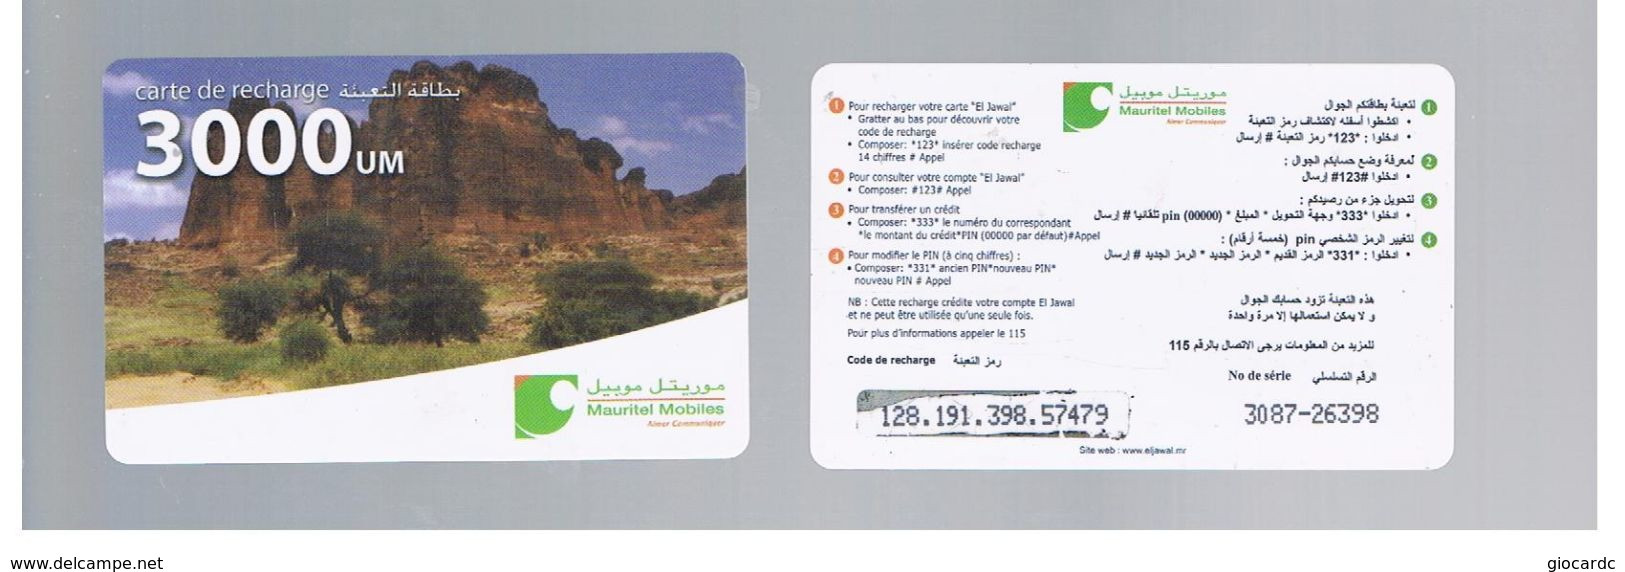 MAURITANIA   - MAURITEL MOBILES (GSM RECHARGE) - MOUNTAINS AND TREES  3000      - USED  -  RIF. 9166 - Montagnes